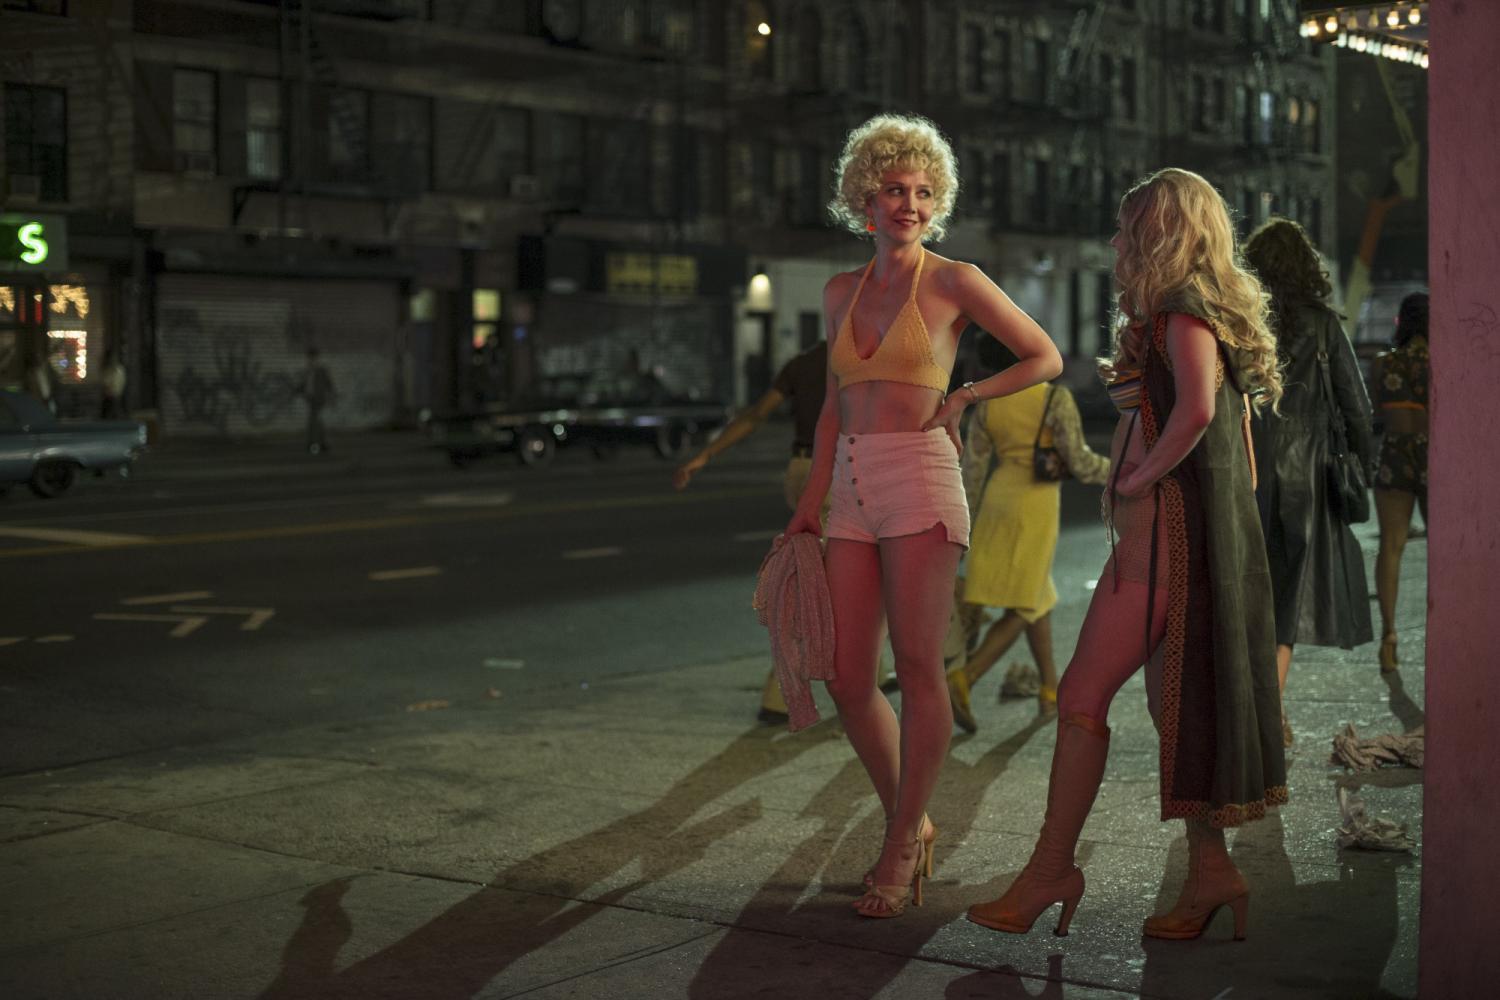 HBO’s “The Deuce” shows the grittier side of New York City with James Franco and Maggie Gyllenhaal.

